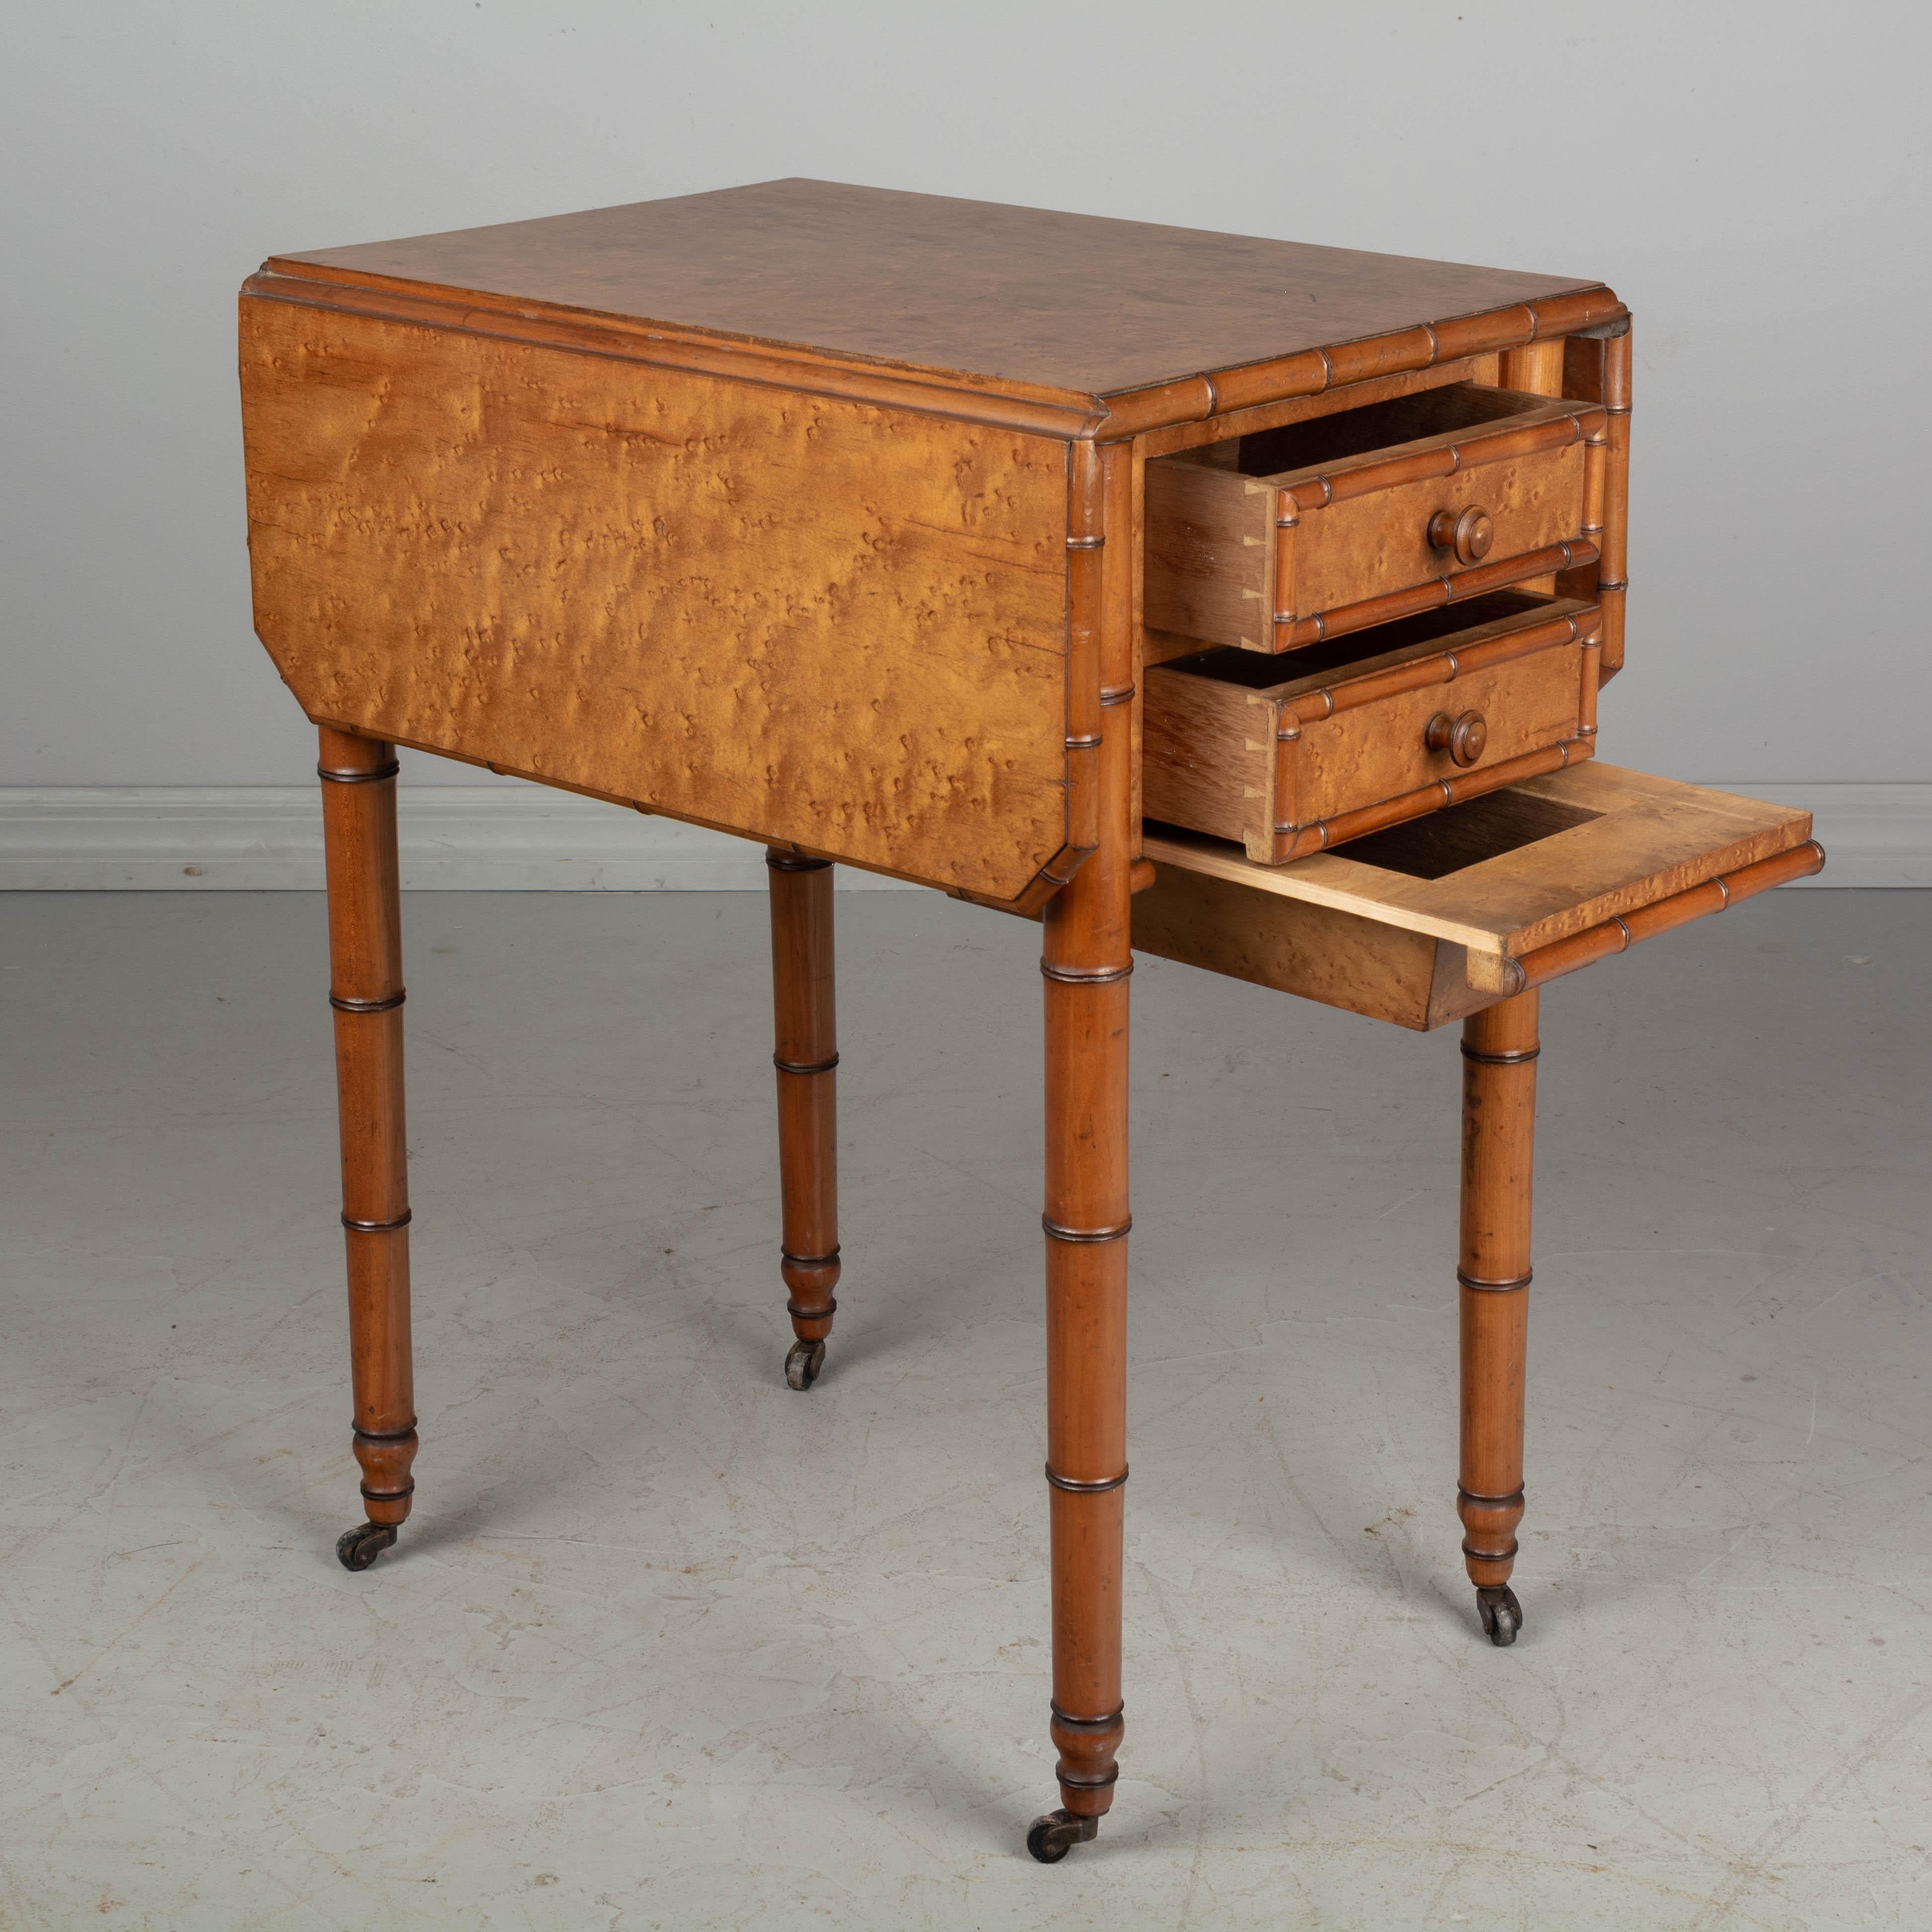 A 19th century French faux bamboo bedside table, or nightstand, made of cherrywood and veneer of bird's-eye maple. This is a versatile side table with a drop leaf top, two dovetailed drawers one side and a small hidden drawer underneath. The